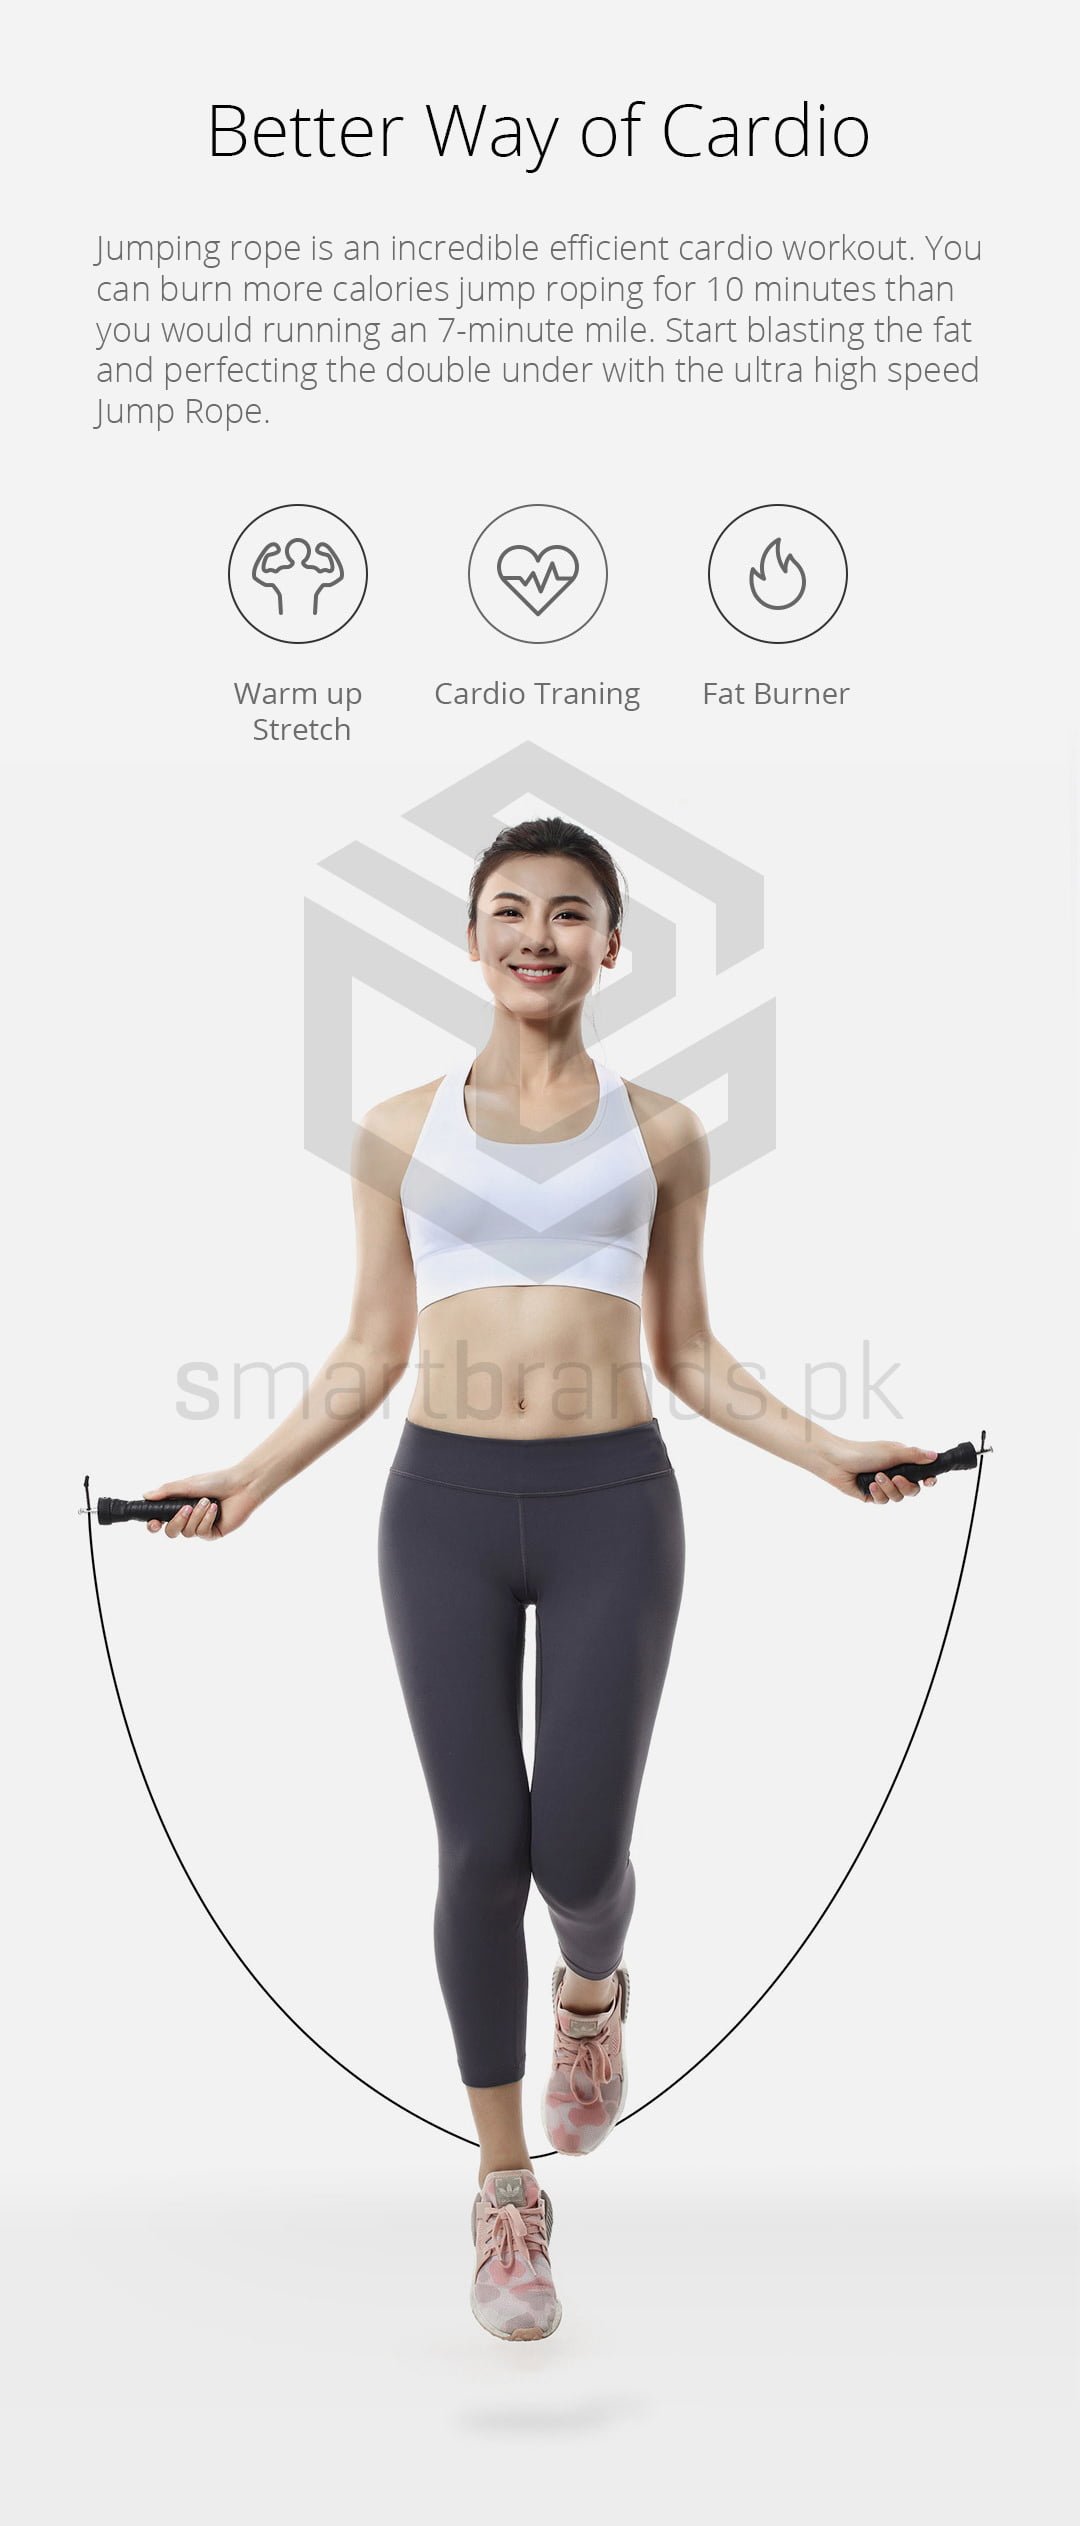 Jumping rope is an incredible efficient cardio workout. You can burn more calories jump roping for 10 minutes than you would running an 7-minute mile. Start blasting the fat and perfecting the double under with the ultra high speed Jump Rope.